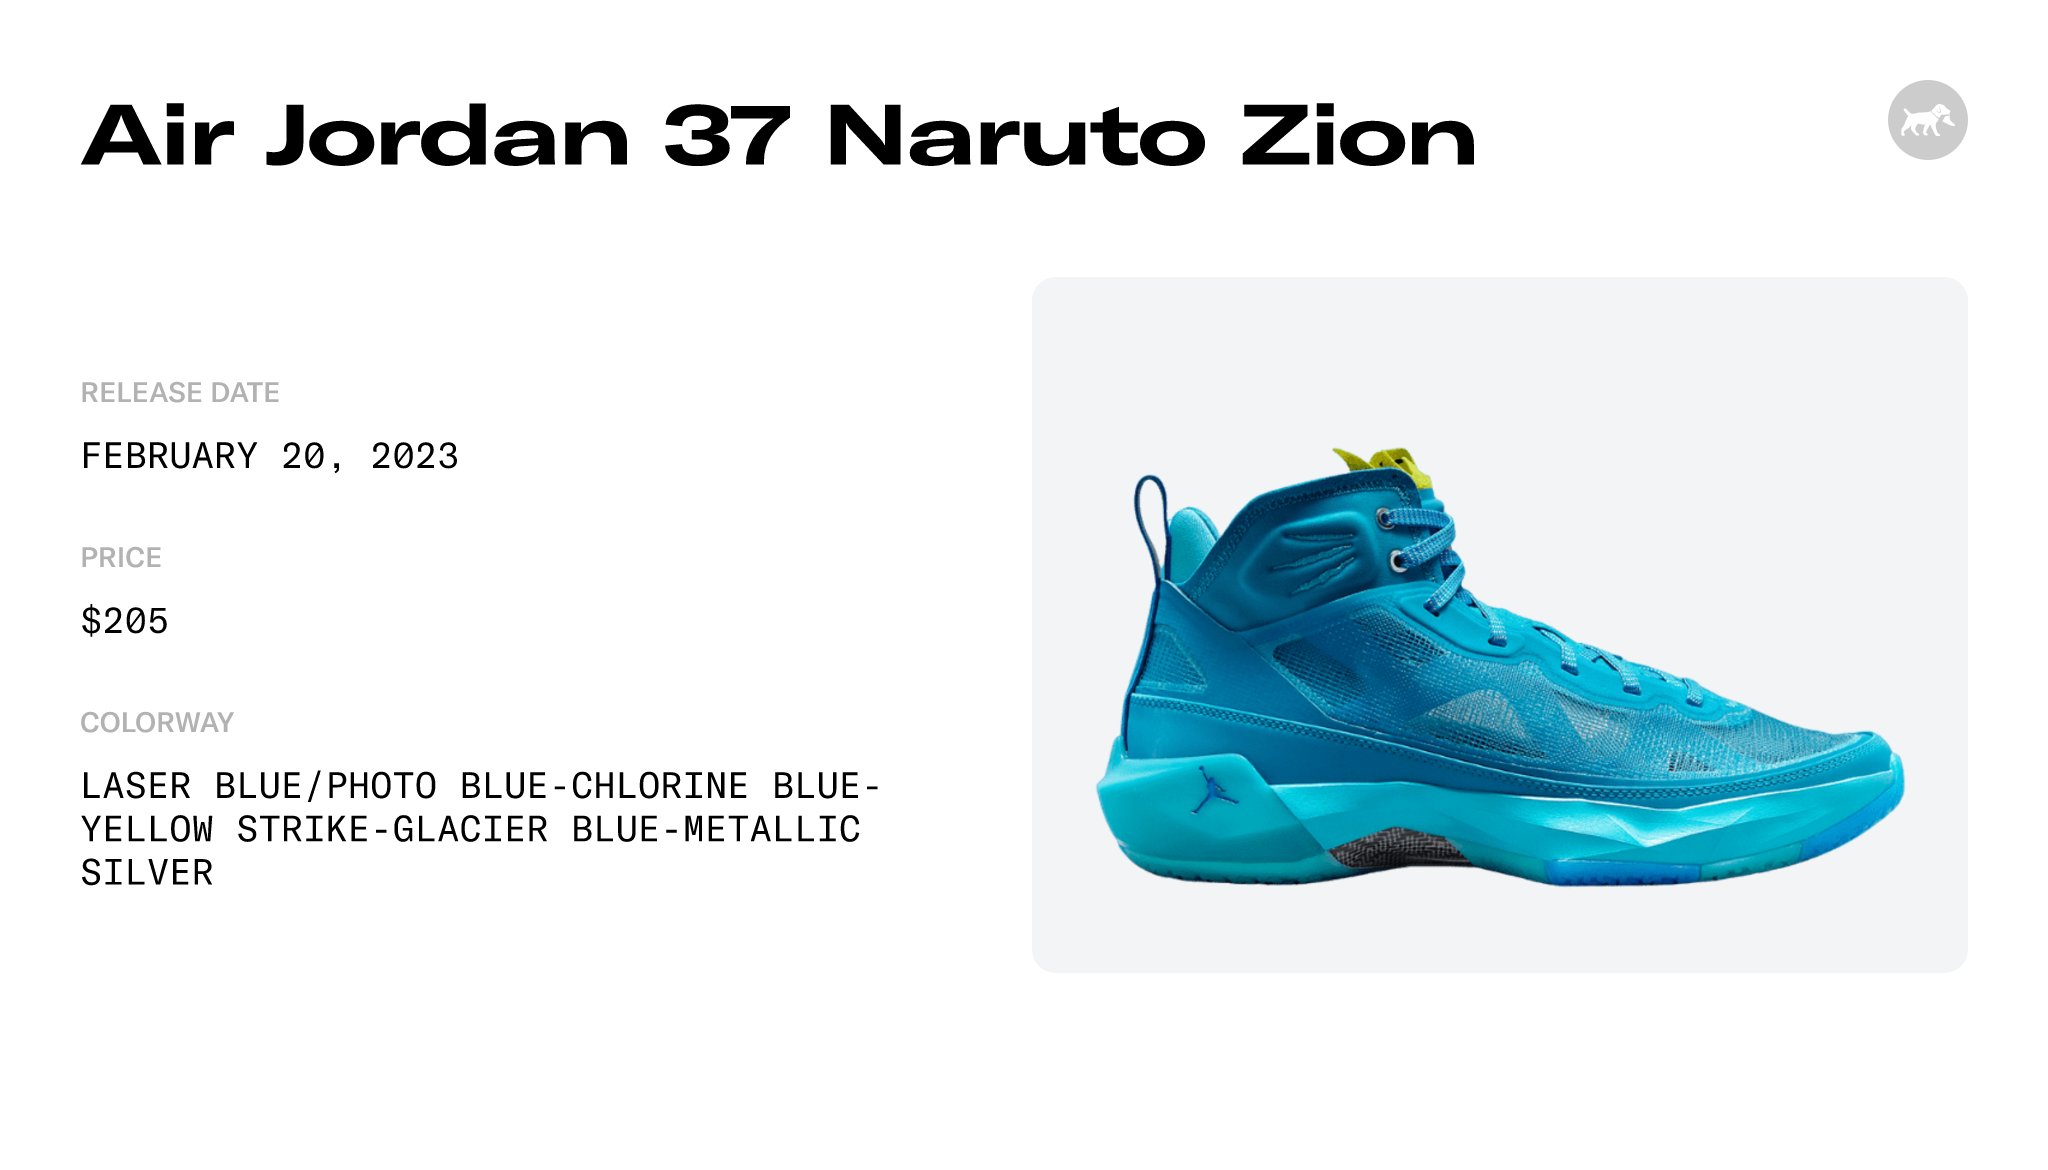 Air Jordan 37 Naruto Zion - DX1690-400 Raffles and Release Date